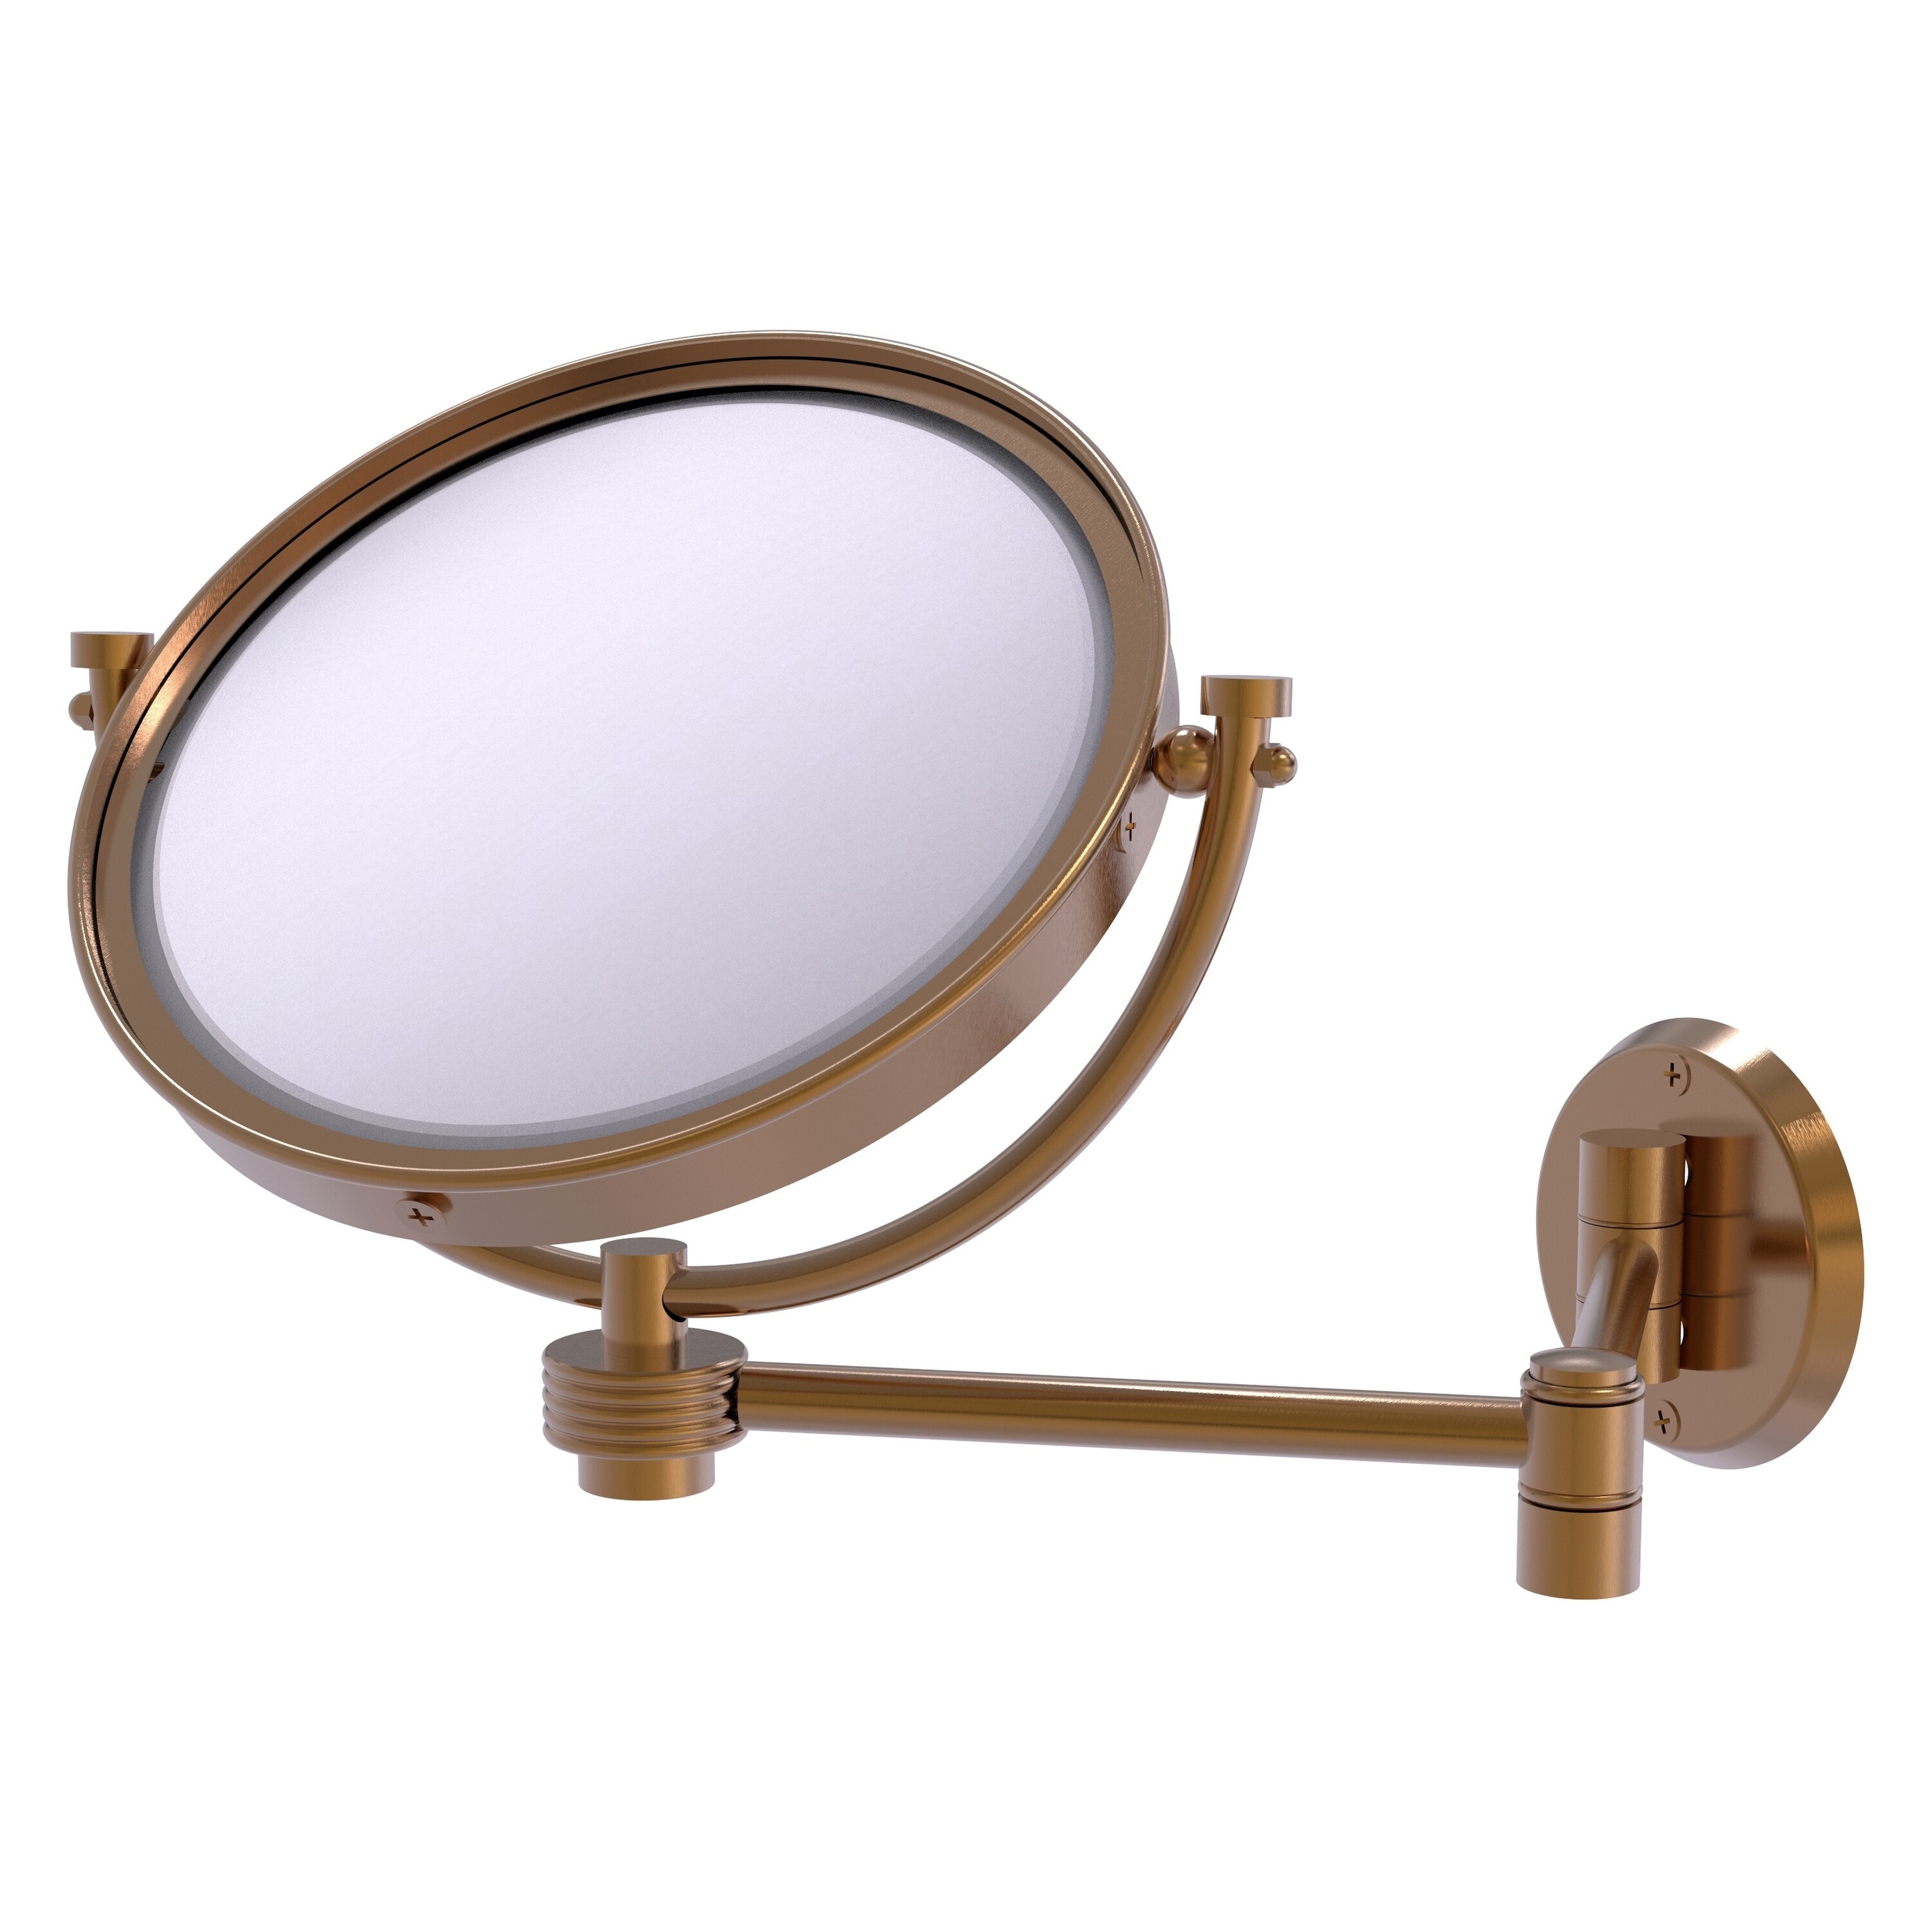 8-in x 10-in Brushed Copper Double-sided 2X Magnifying Wall-mounted Vanity Mirror | - Allied Brass WM-6G/2X-BBR